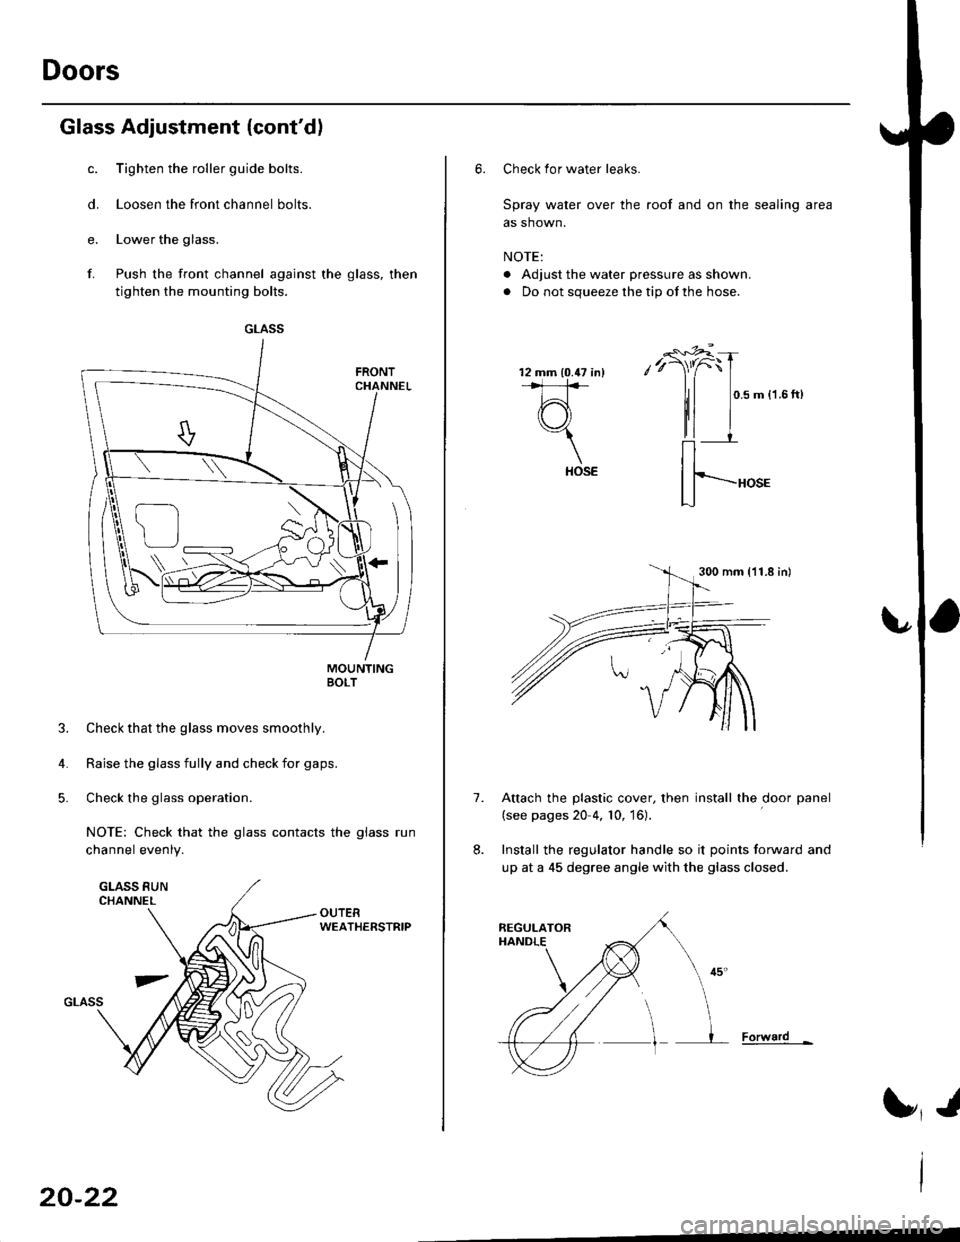 HONDA CIVIC 1998 6.G Workshop Manual Doors
Glass Adjustment {contd)
c. Tighten the roller guide bolts.
d. Loosen the front channel bolts.
e. Lower the glass.
f. Push the front channel against the glass, then
tighten the mounting bolts.
